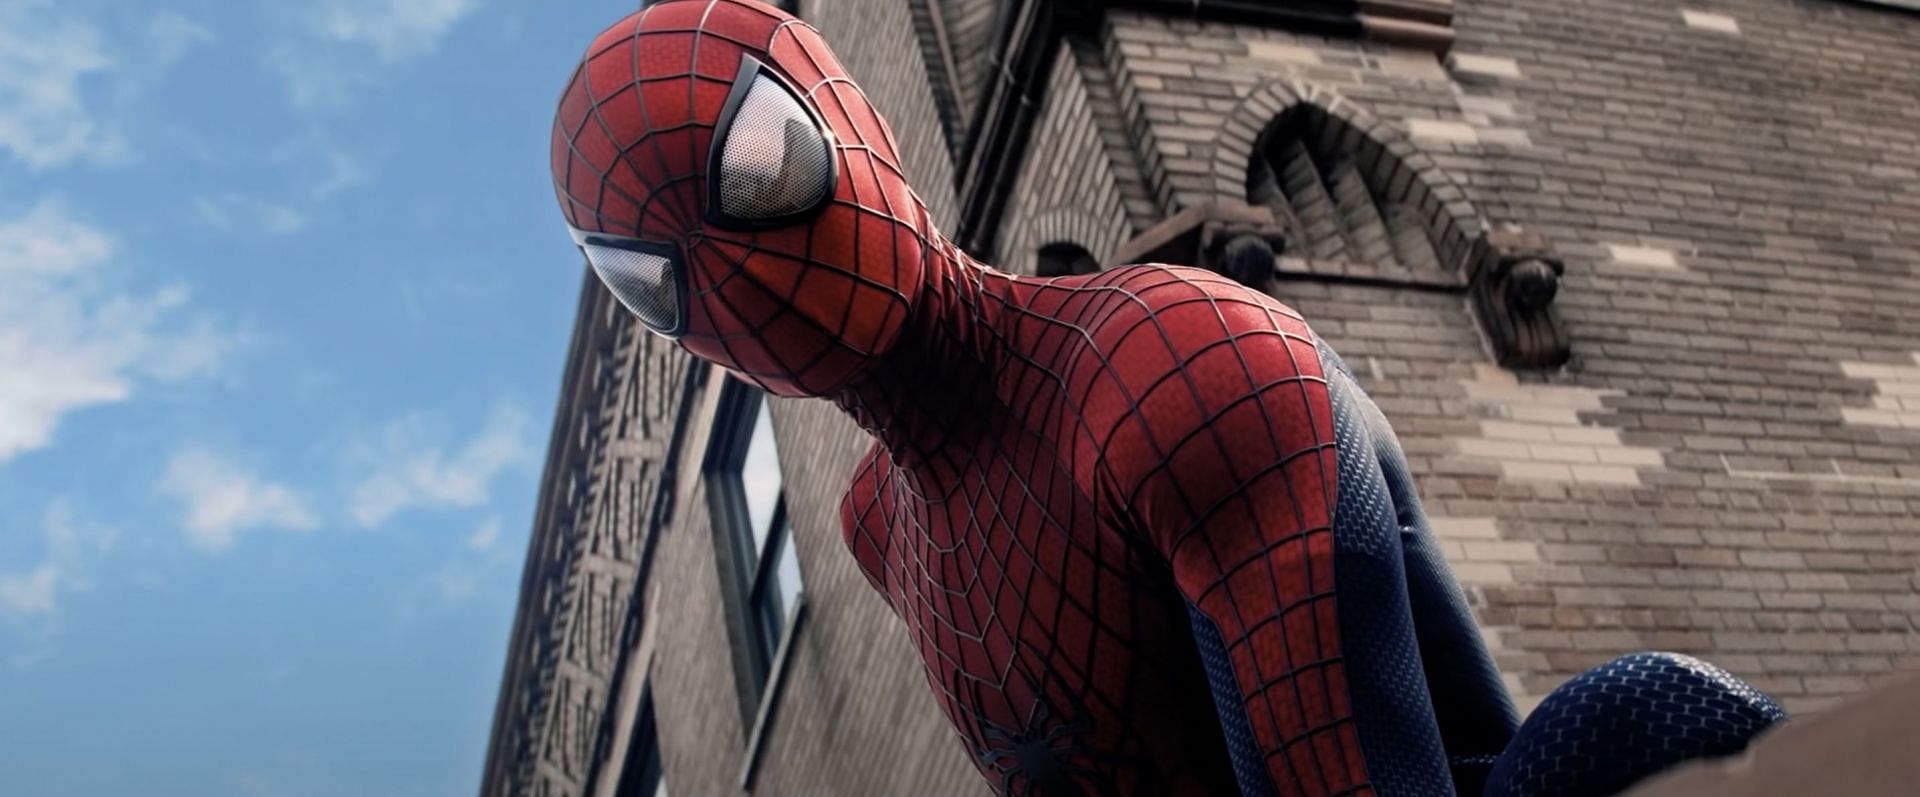 5 reasons The Amazing Spider-Man 3 needs to be made